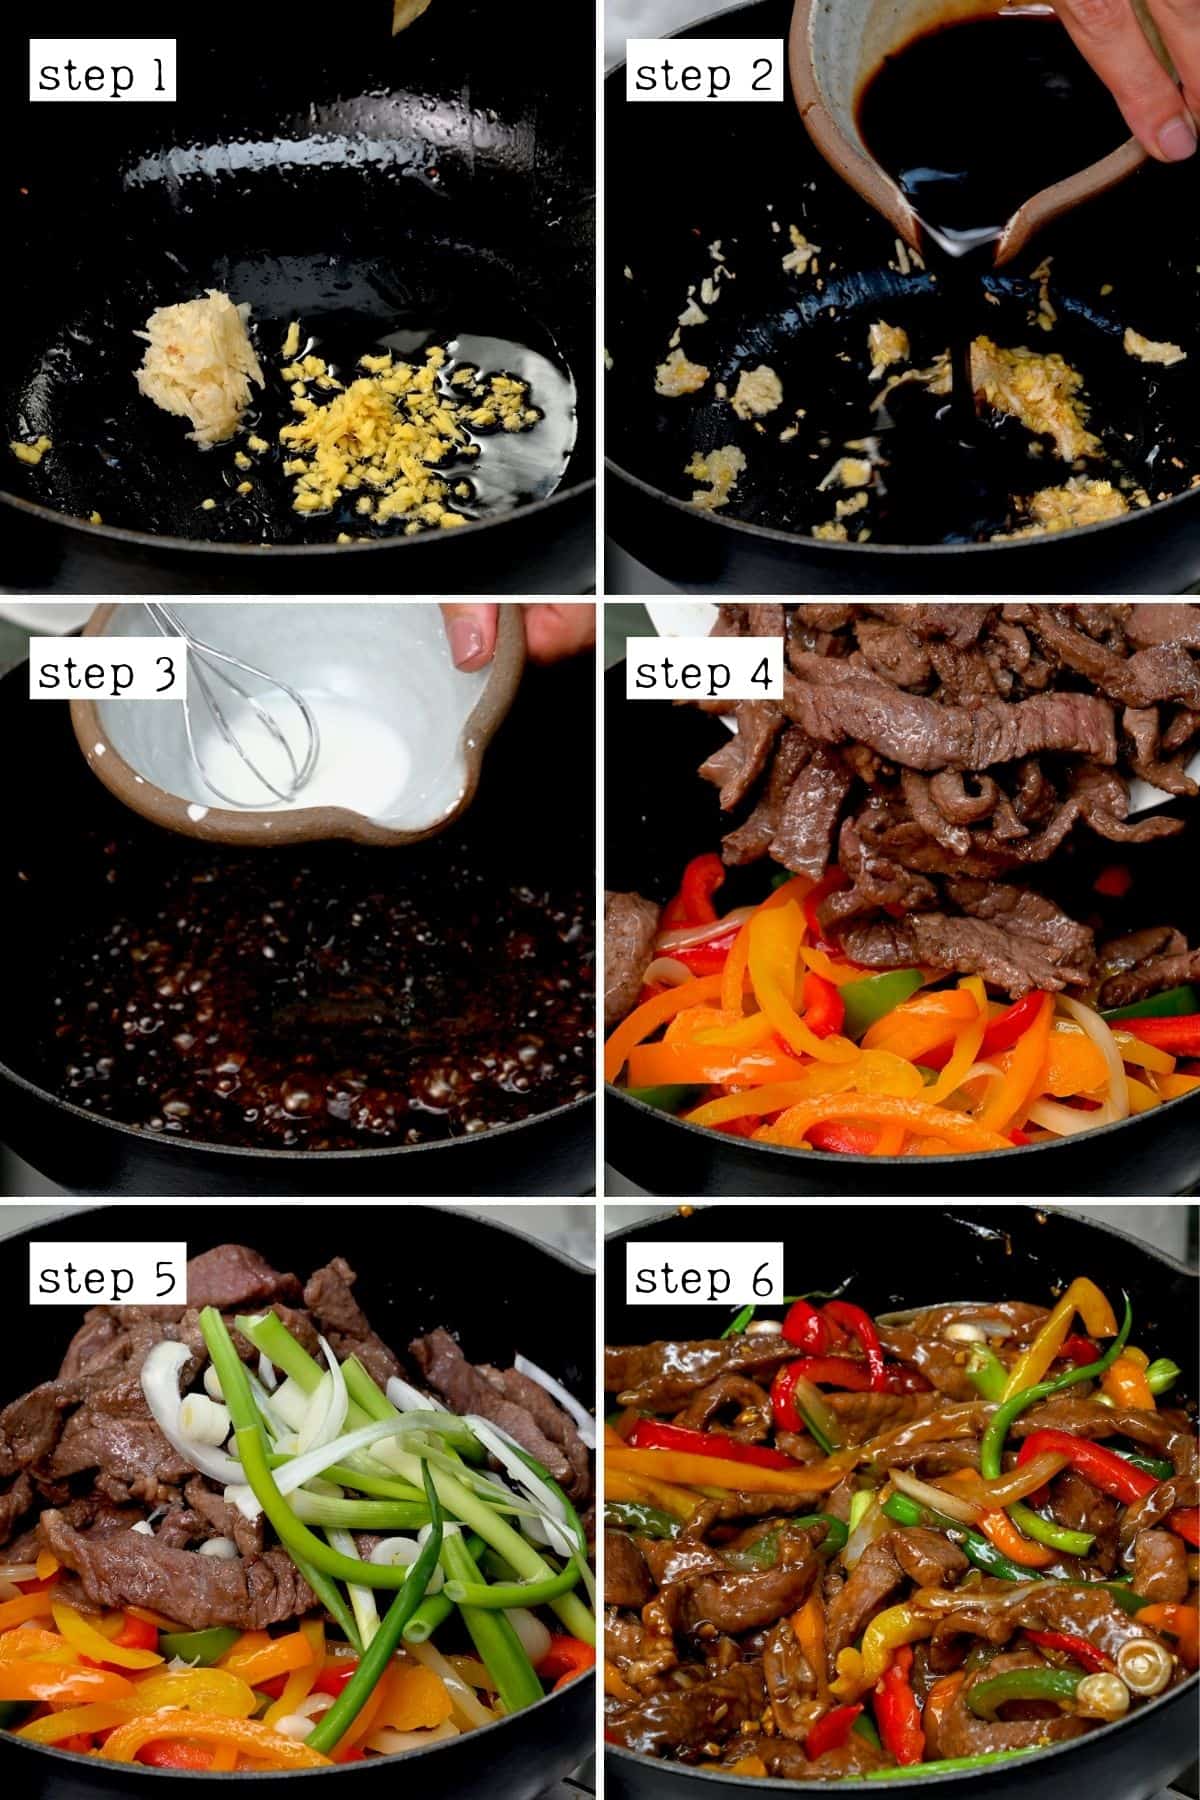 Steps for making beef stir fry with pepper and green onions